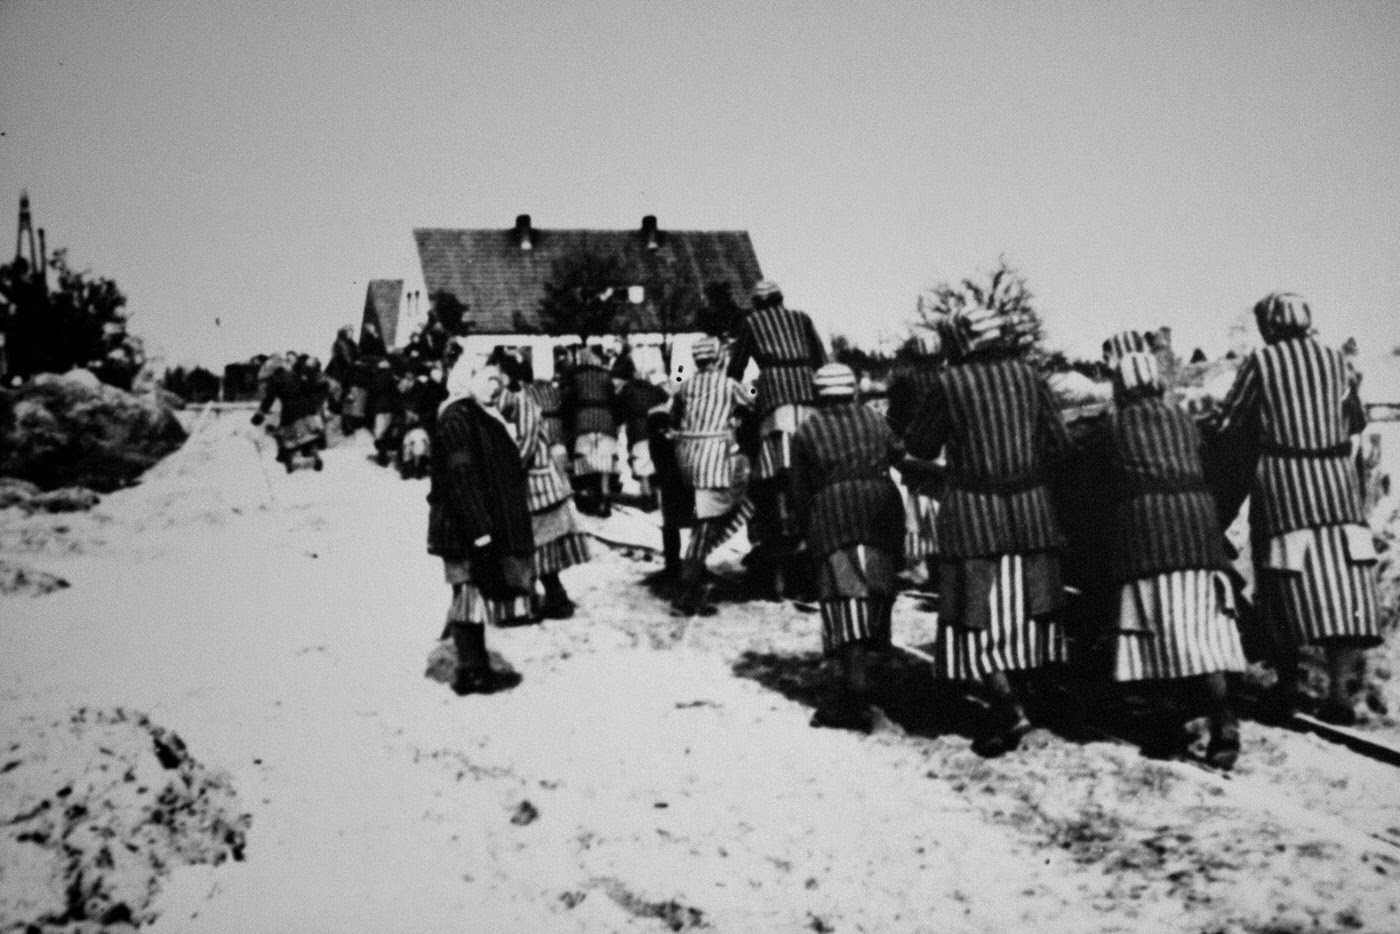 Female prisoners at forced labor in the Ravensbruck concentration camp.